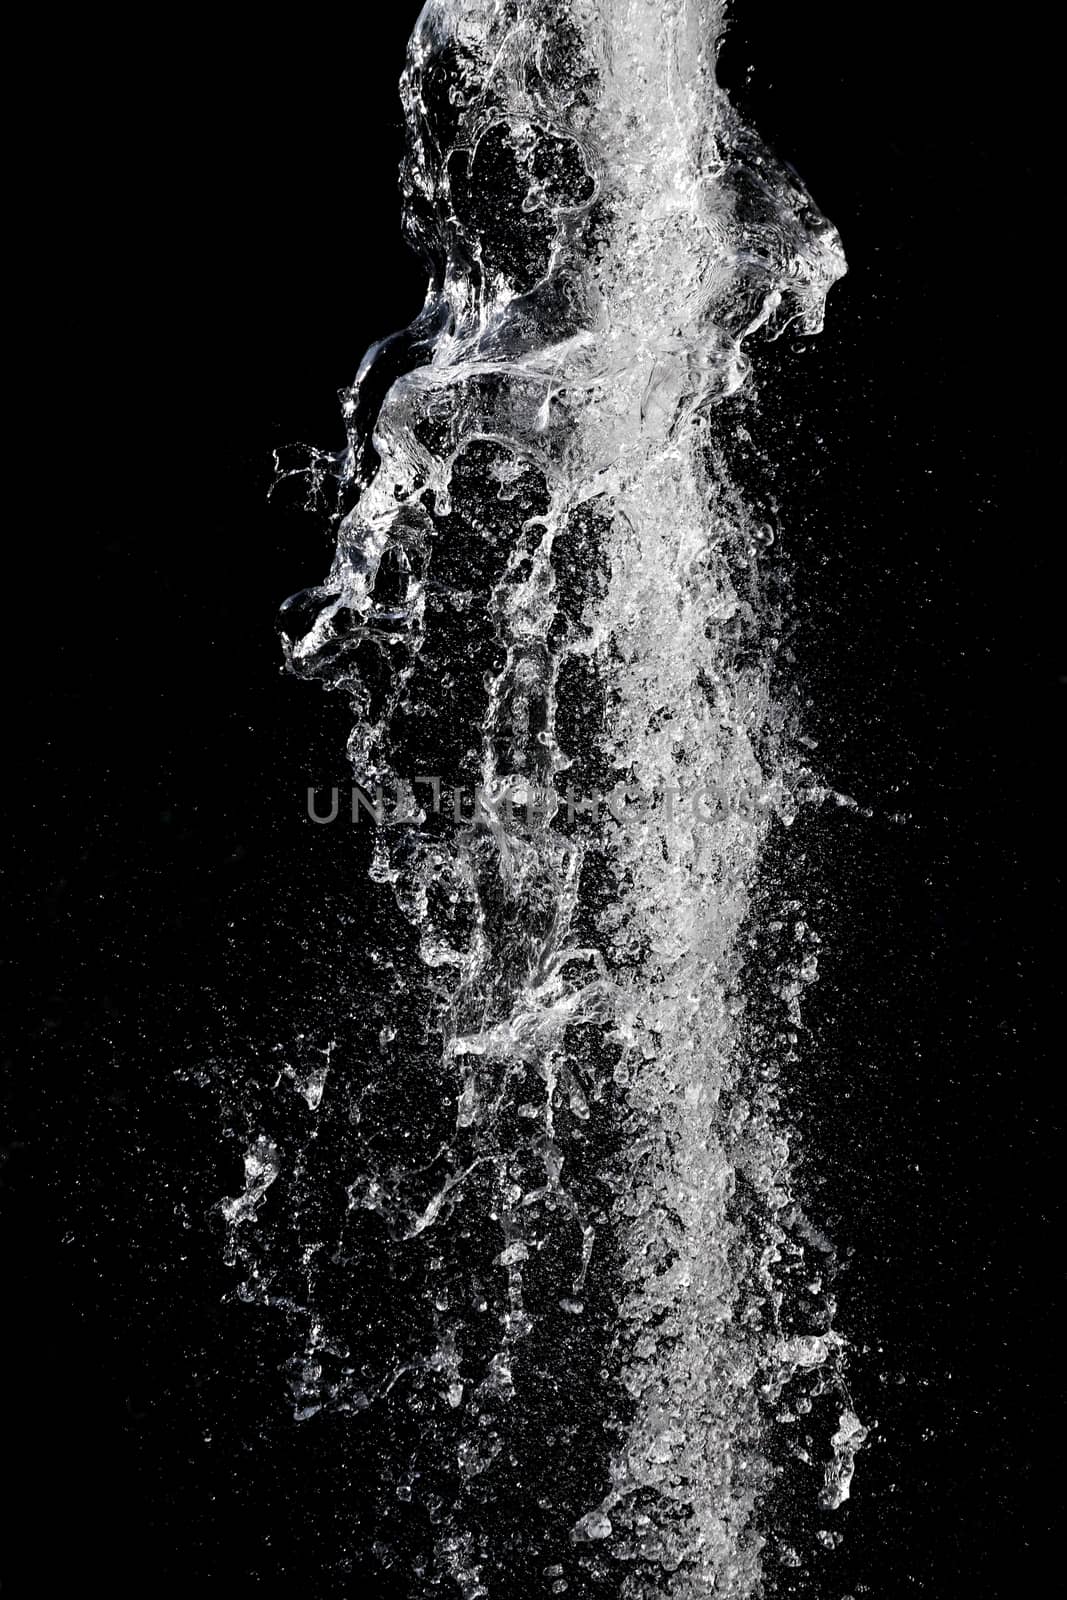 Splash of pouring water isolated over black background